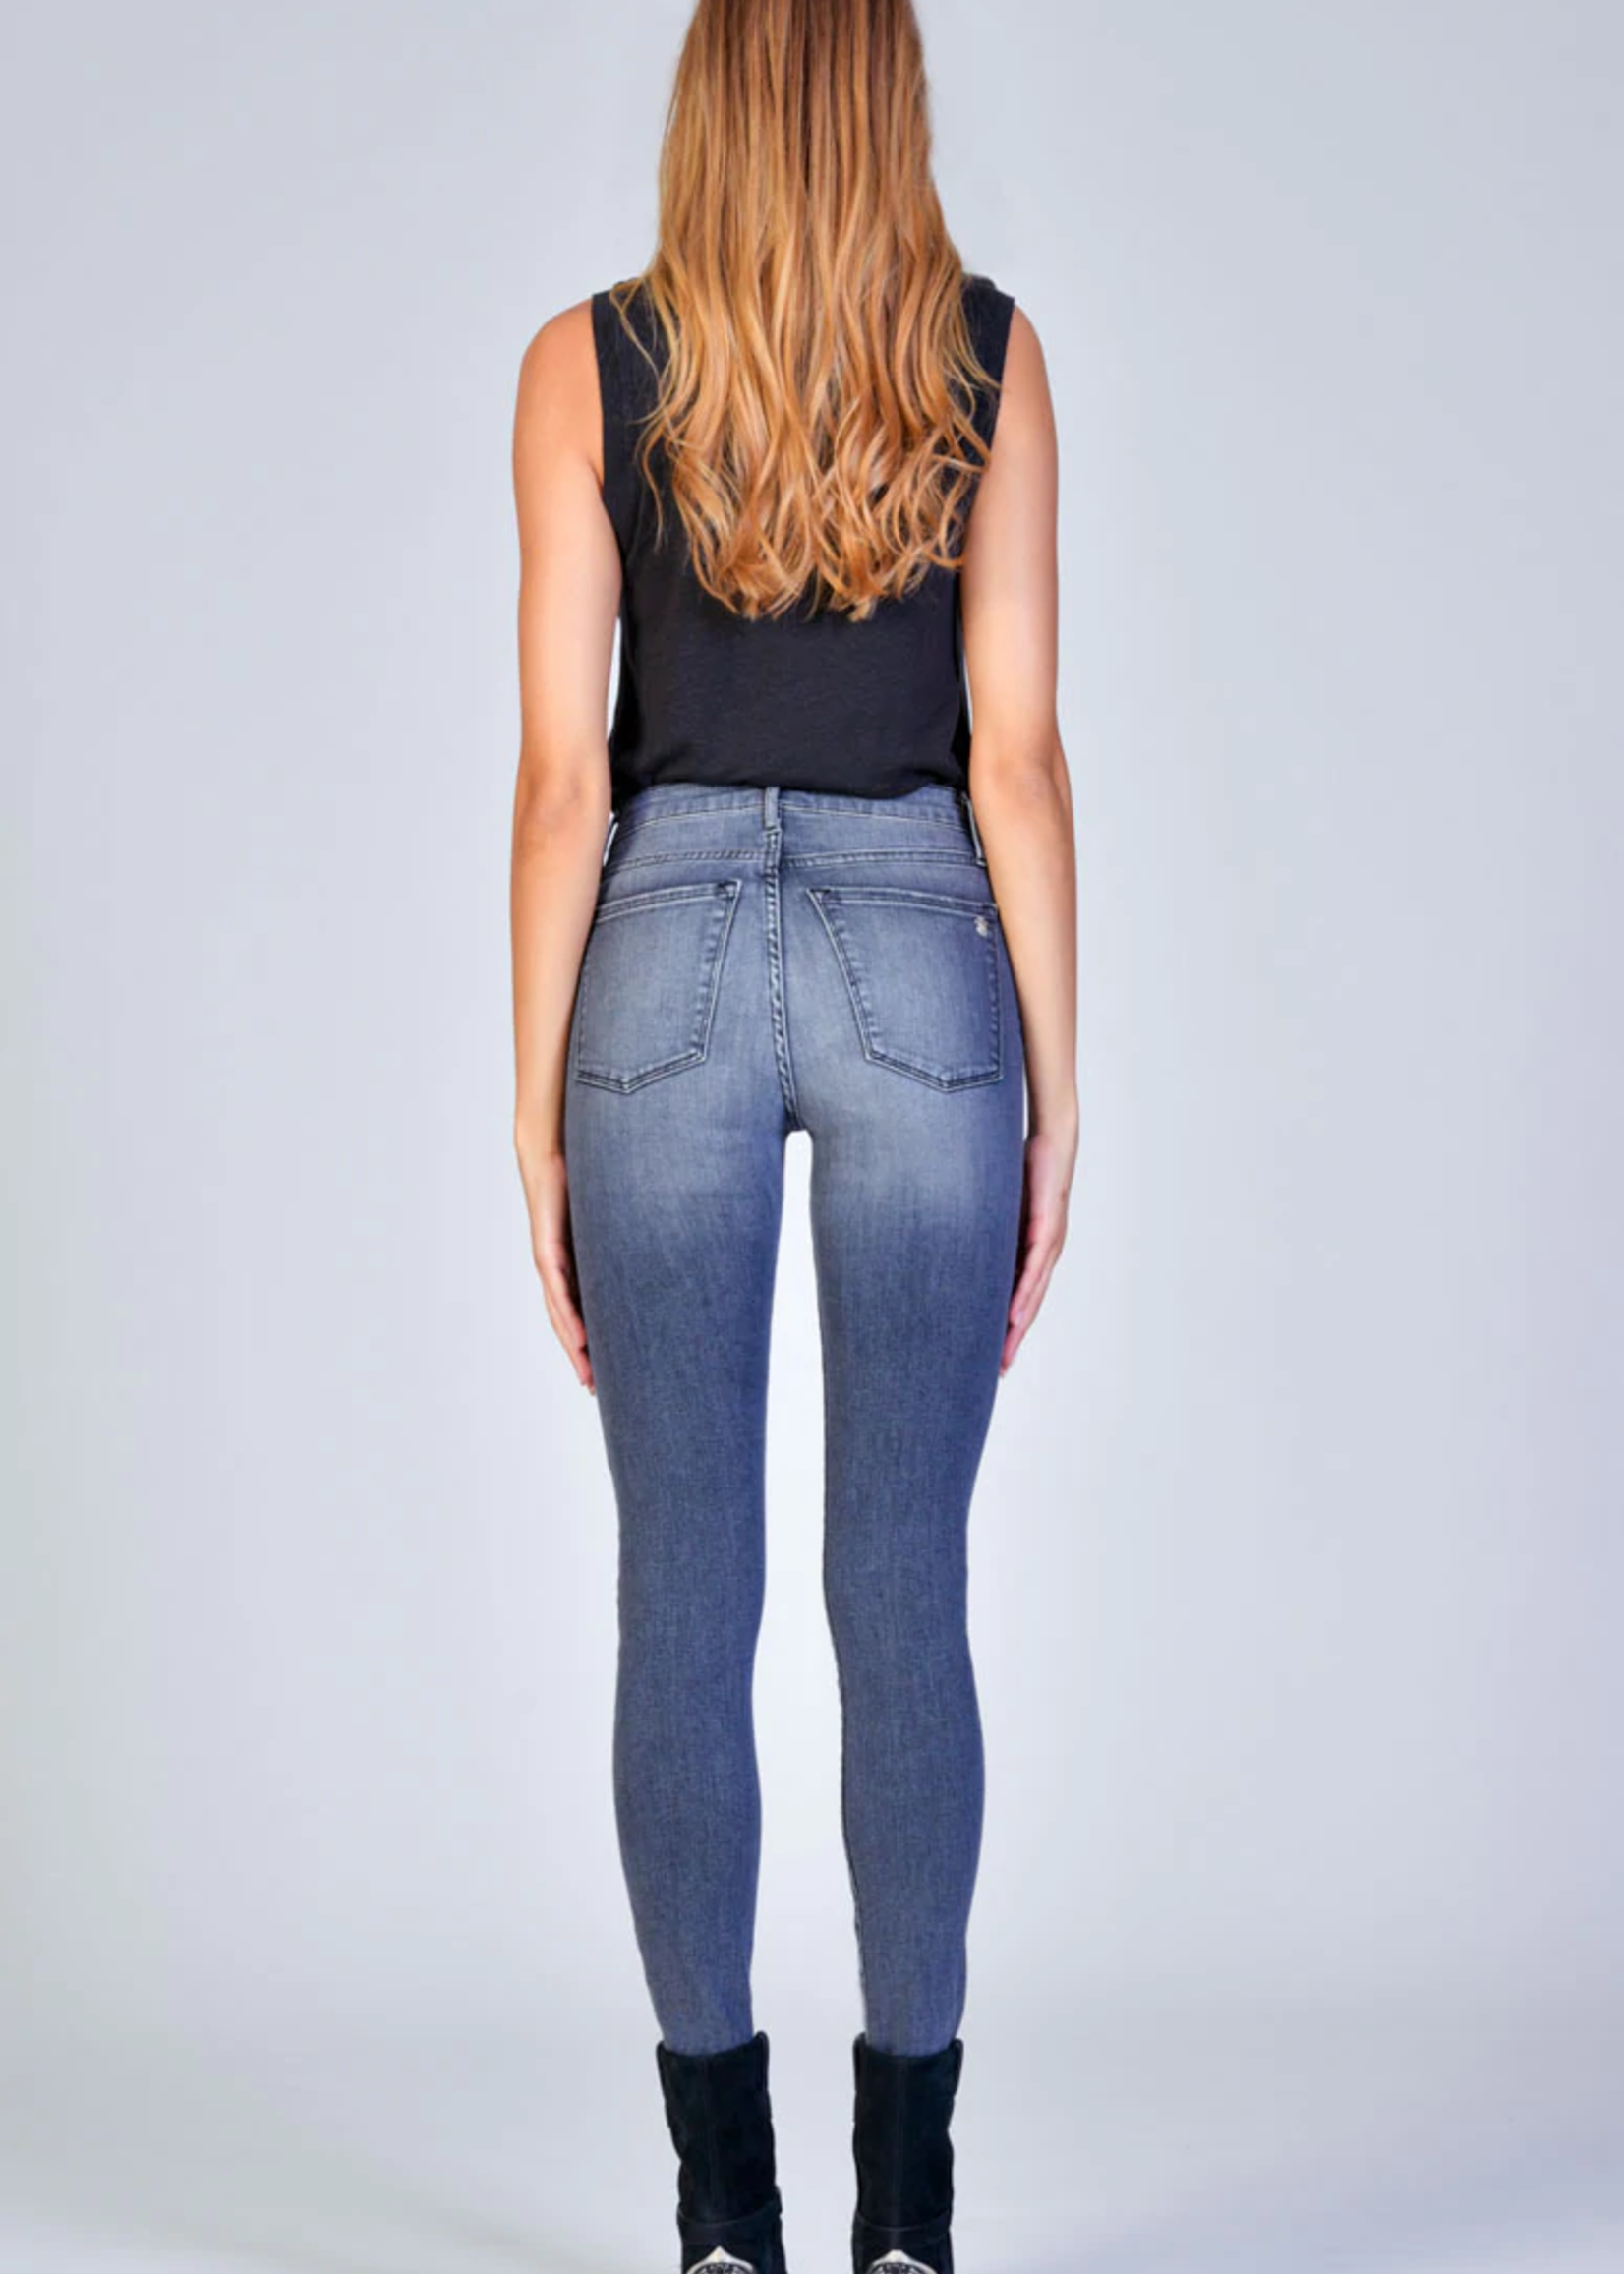 Black Orchid Denim Gisele High Rise Skinny - Stole The Show